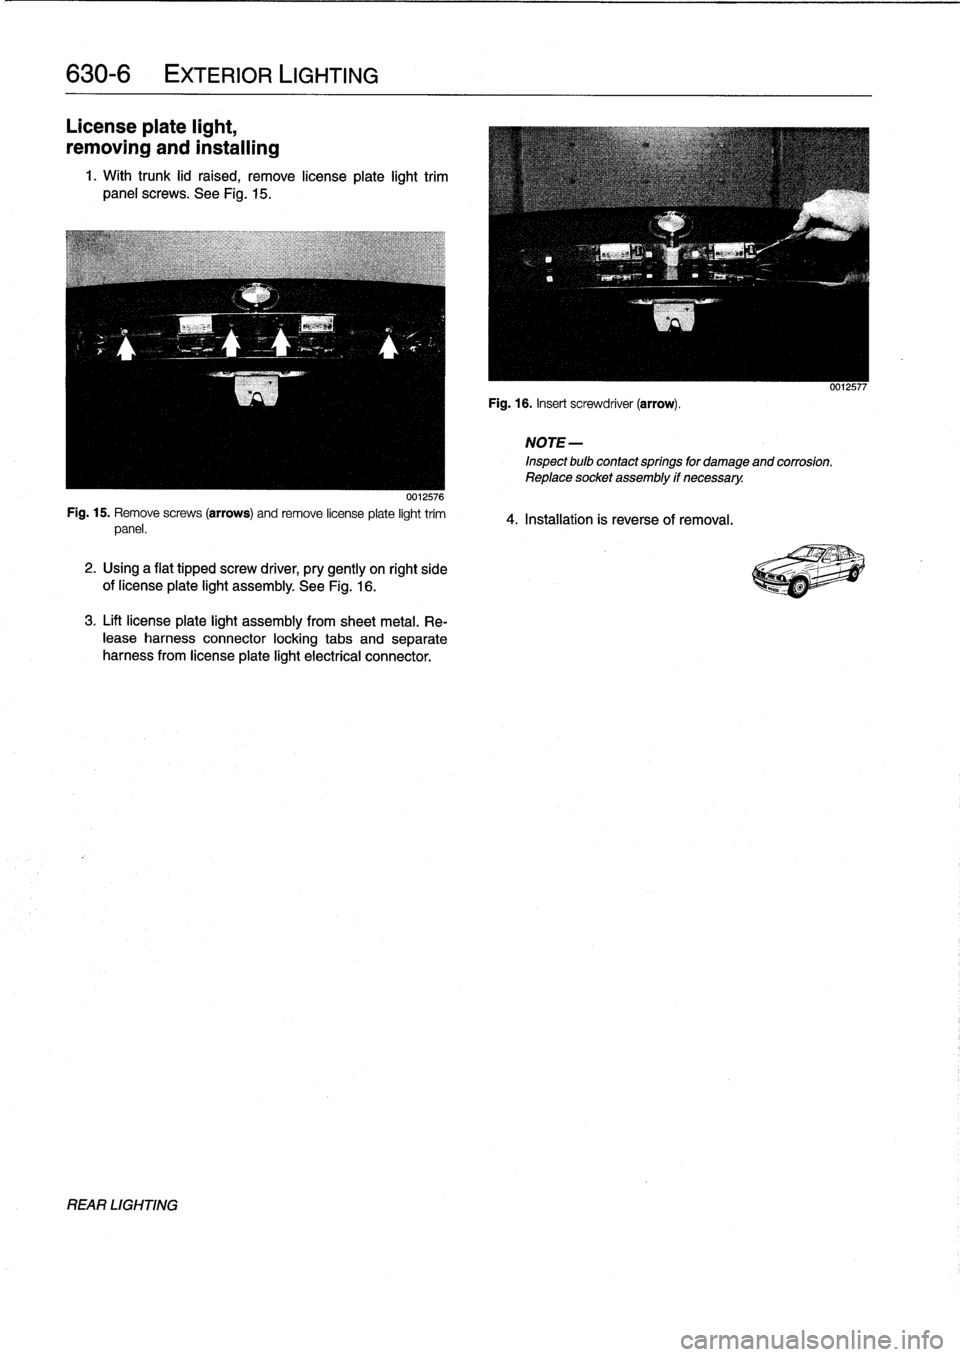 BMW 323i 1995 E36 Workshop Manual 
630-
6

	

EXTERIOR
LIGHTING

License
plate
light,

removing
and
installing

1
.
With
trunk
lid
raised,
remove
lícense
plate
light
trim
panel
screws
.
See
Fig
.
15
.

0012576
Fig
.
15
.
Remove
screw